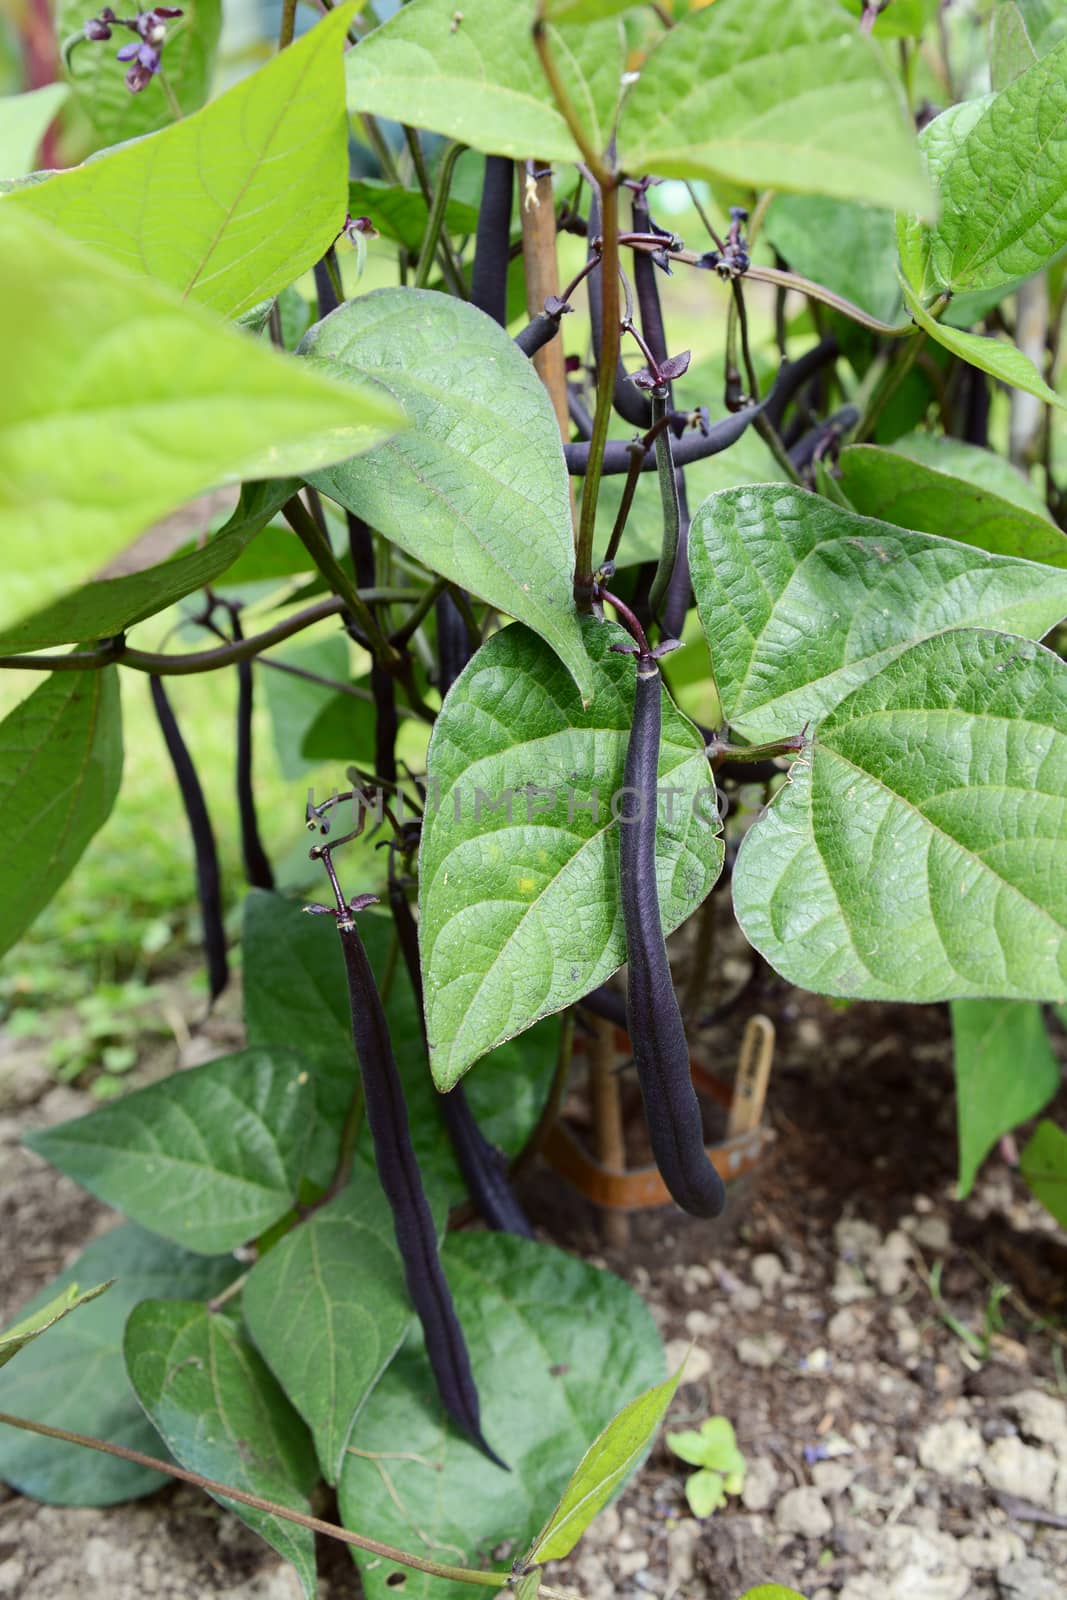 Dark purple French beans grow on dwarf plants, the bean pods hanging among green leaves